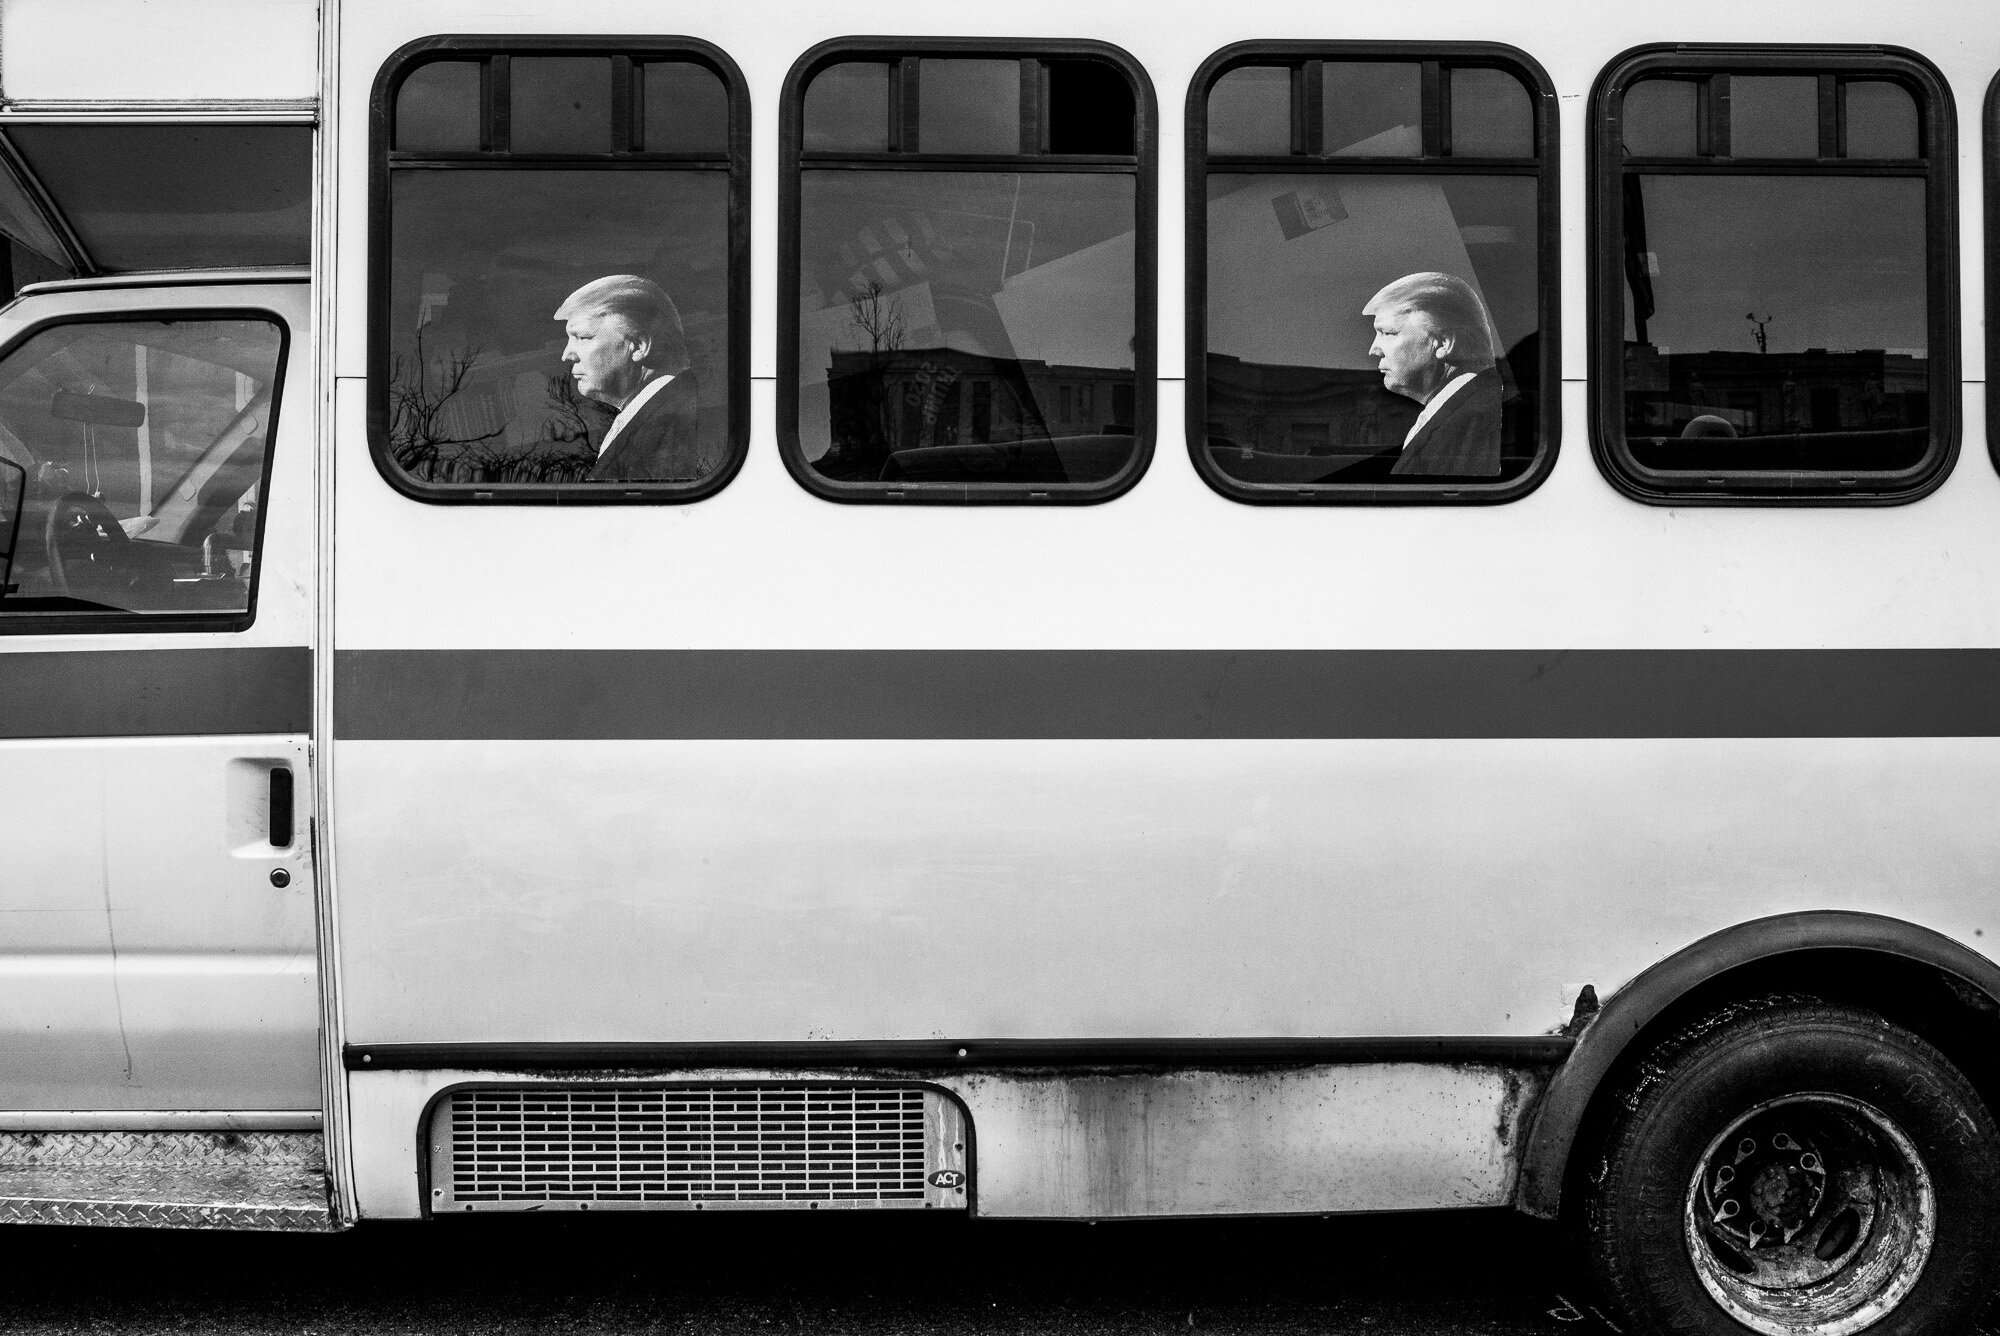  Short bus with Donald Trump cut-outs. 